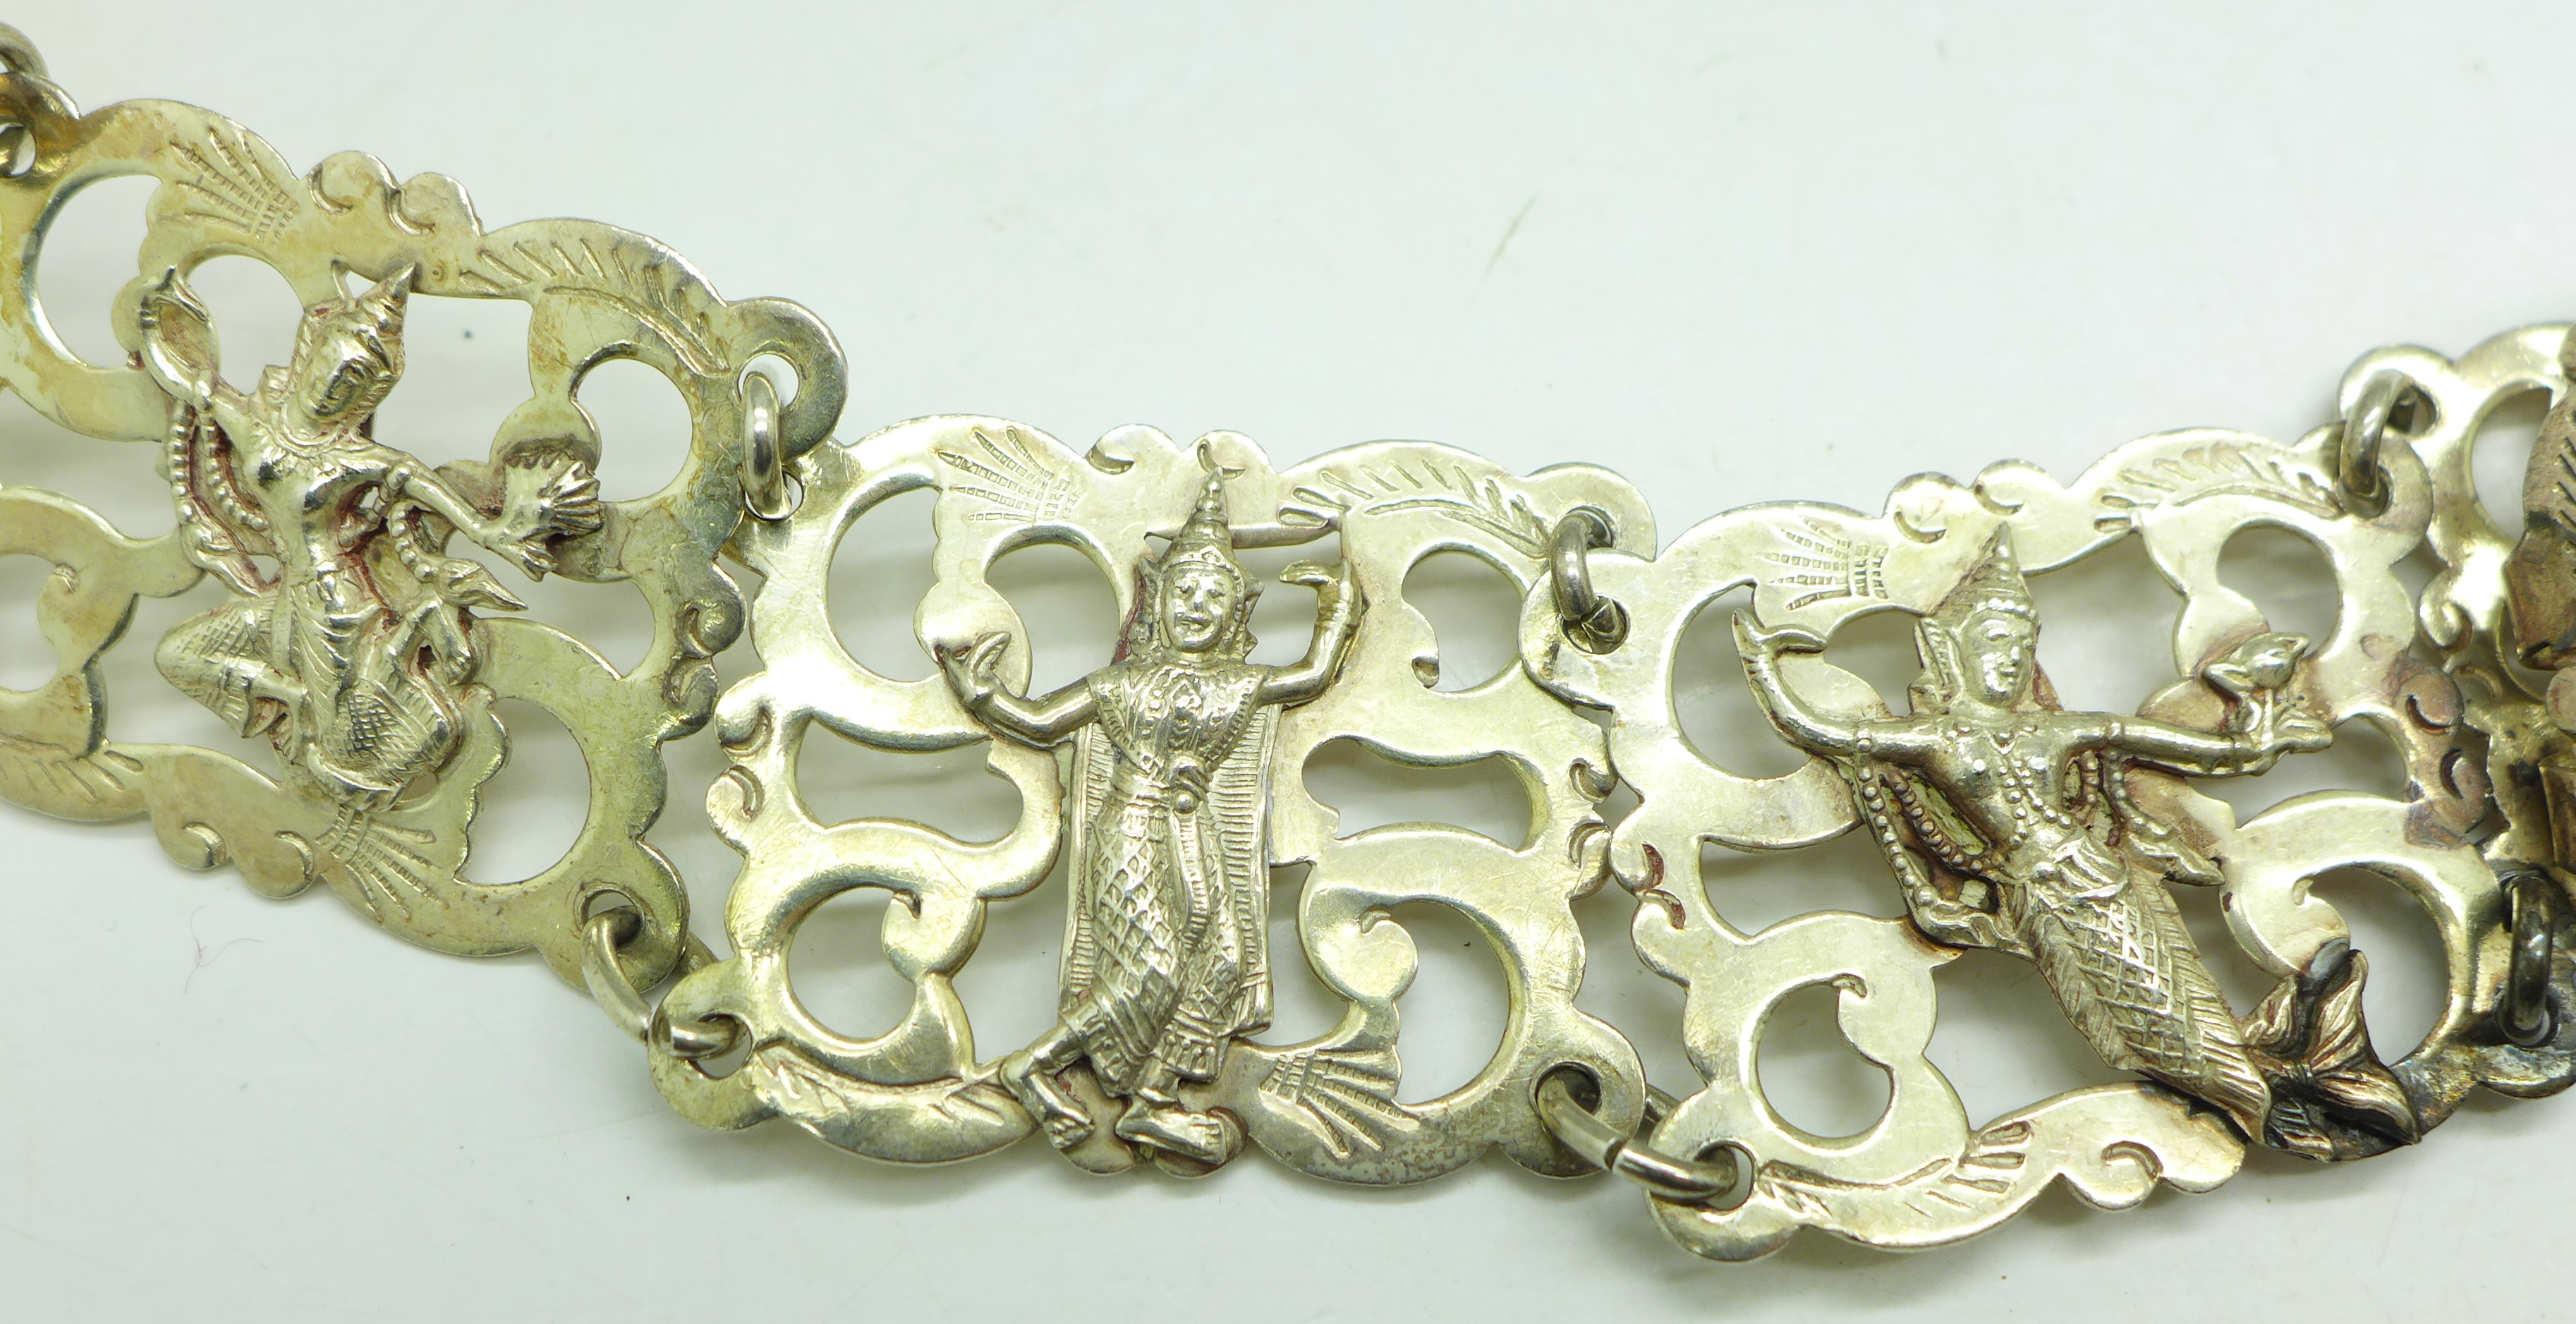 A Siam sterling silver belt, 193g, (fastening clip requires repair) - Image 6 of 8